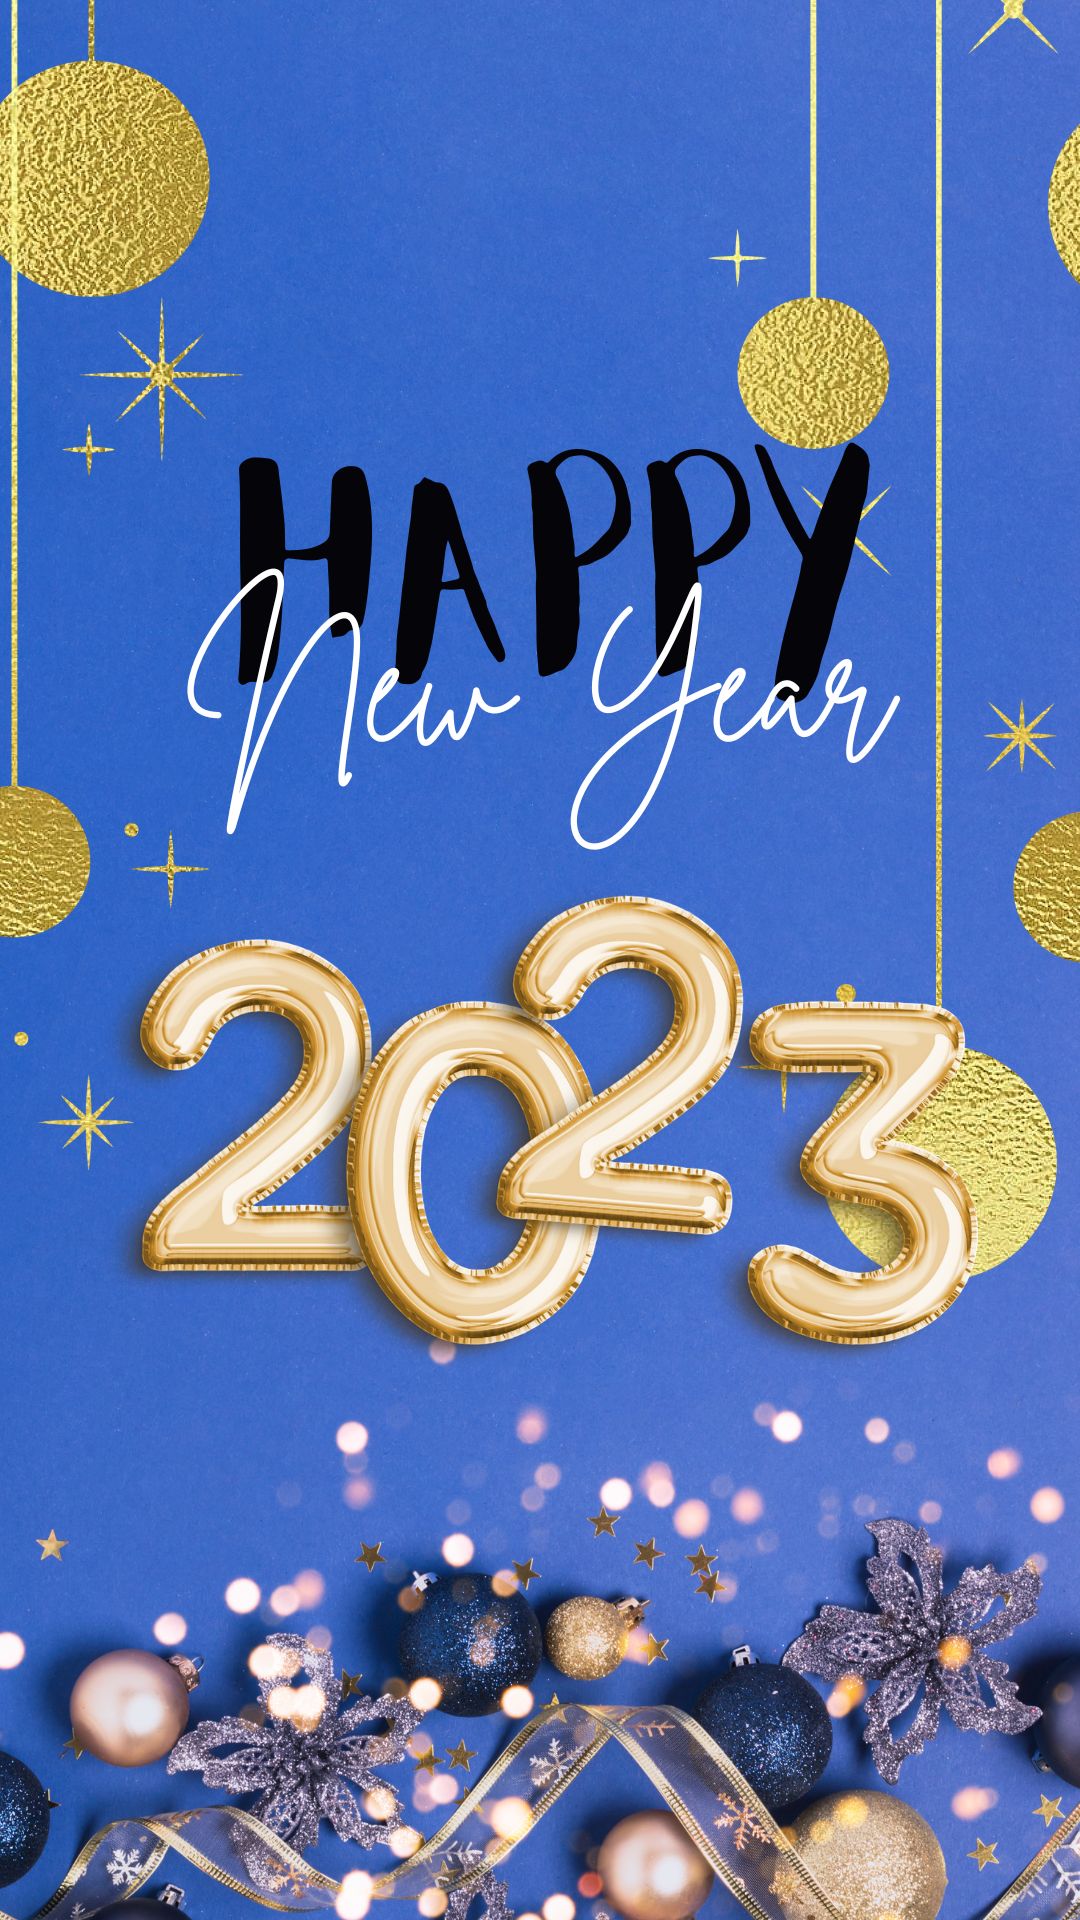 Happy New Year 2023 IPhone Wallpaper HD  IPhone Wallpapers  iPhone  Wallpapers